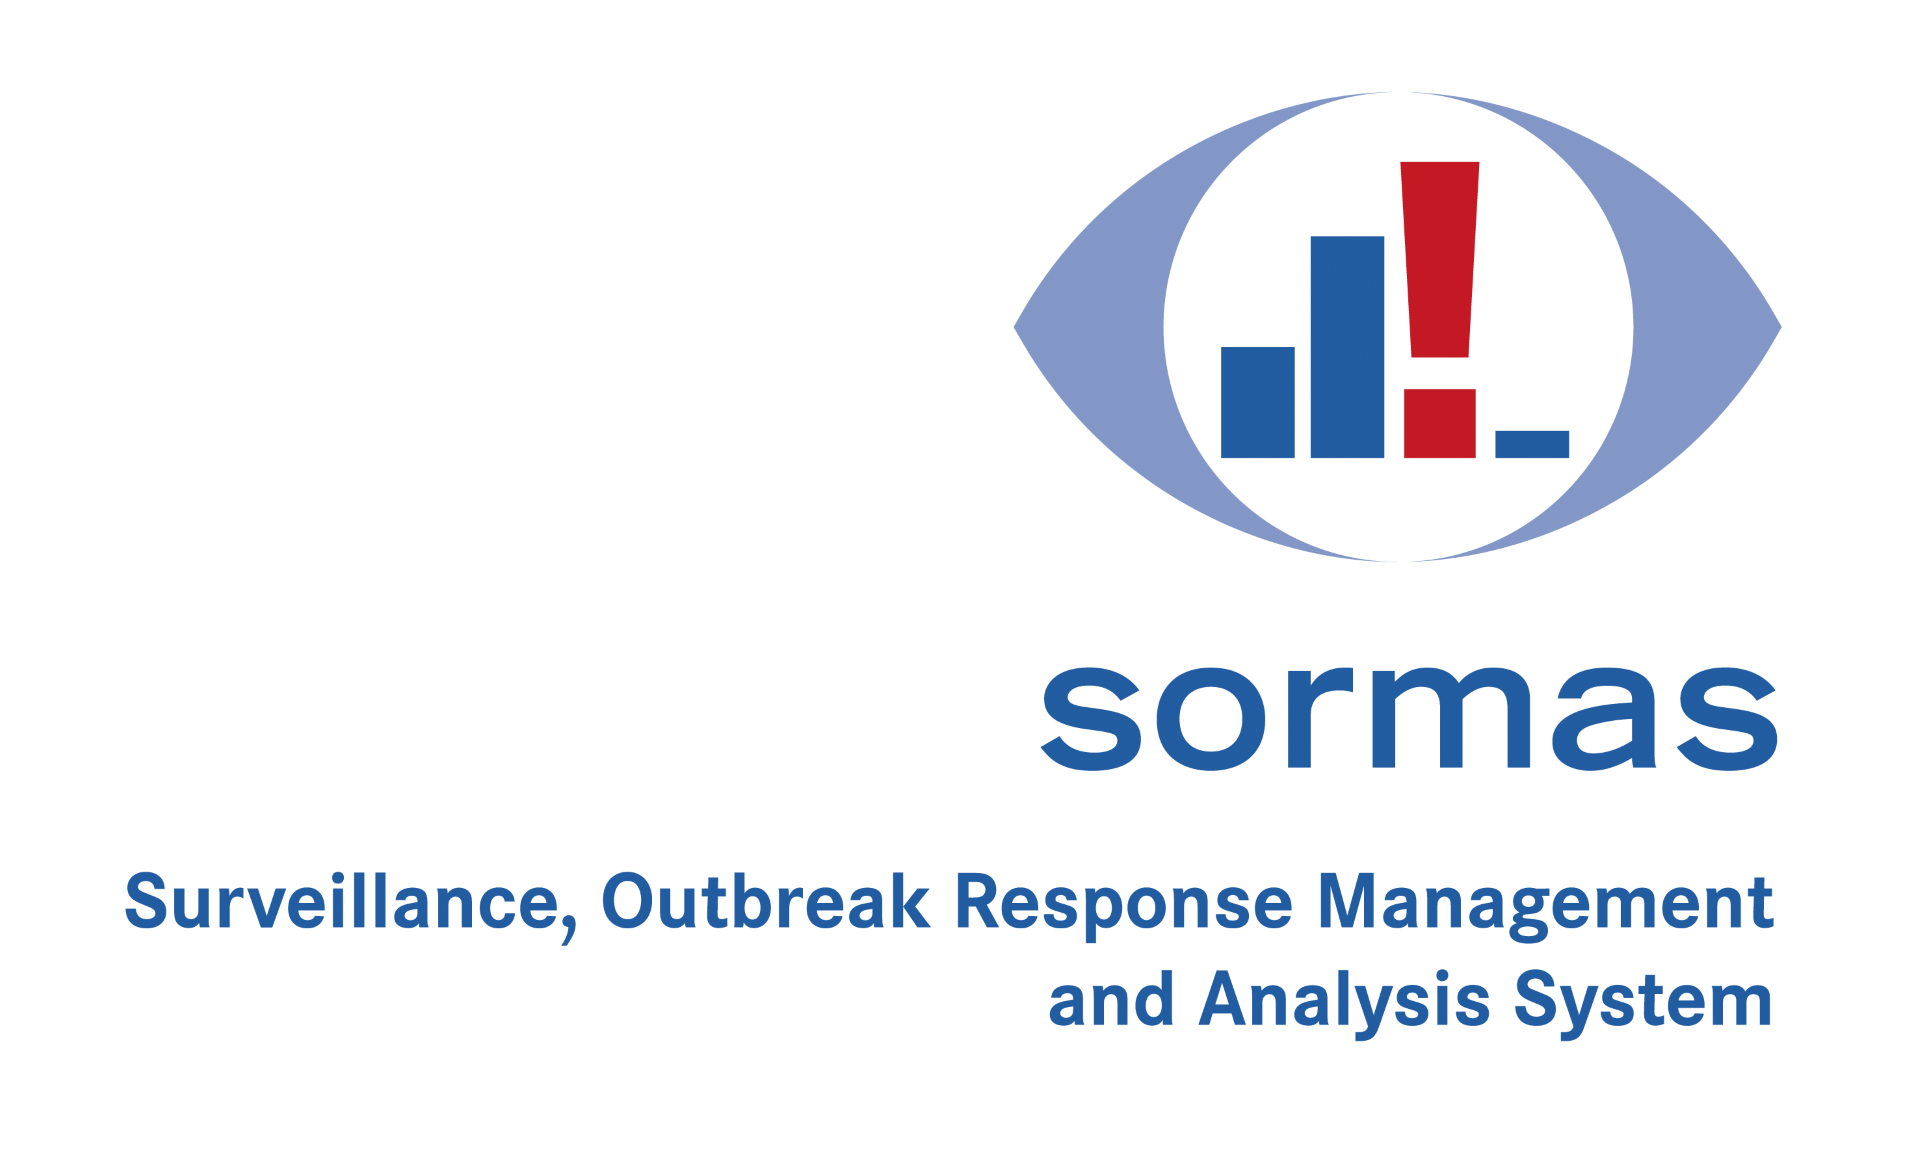 SORMAS - Surveillance, Outbreak Response Management and Analysis System